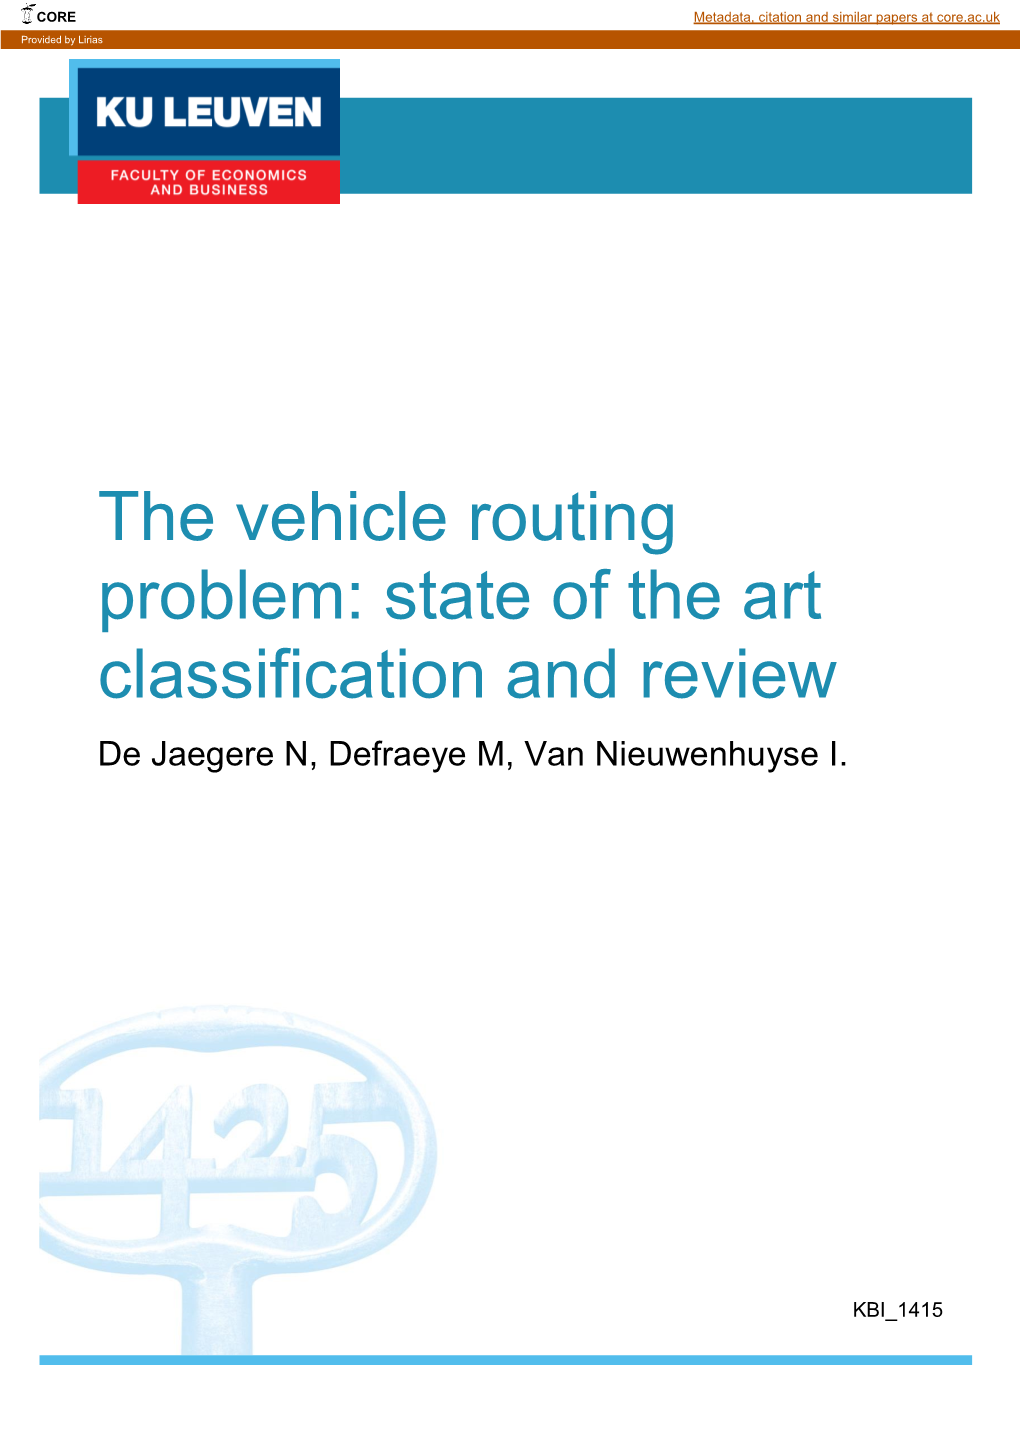 The Vehicle Routing Problem: State of the Art Classification and Review De Jaegere N, Defraeye M, Van Nieuwenhuyse I